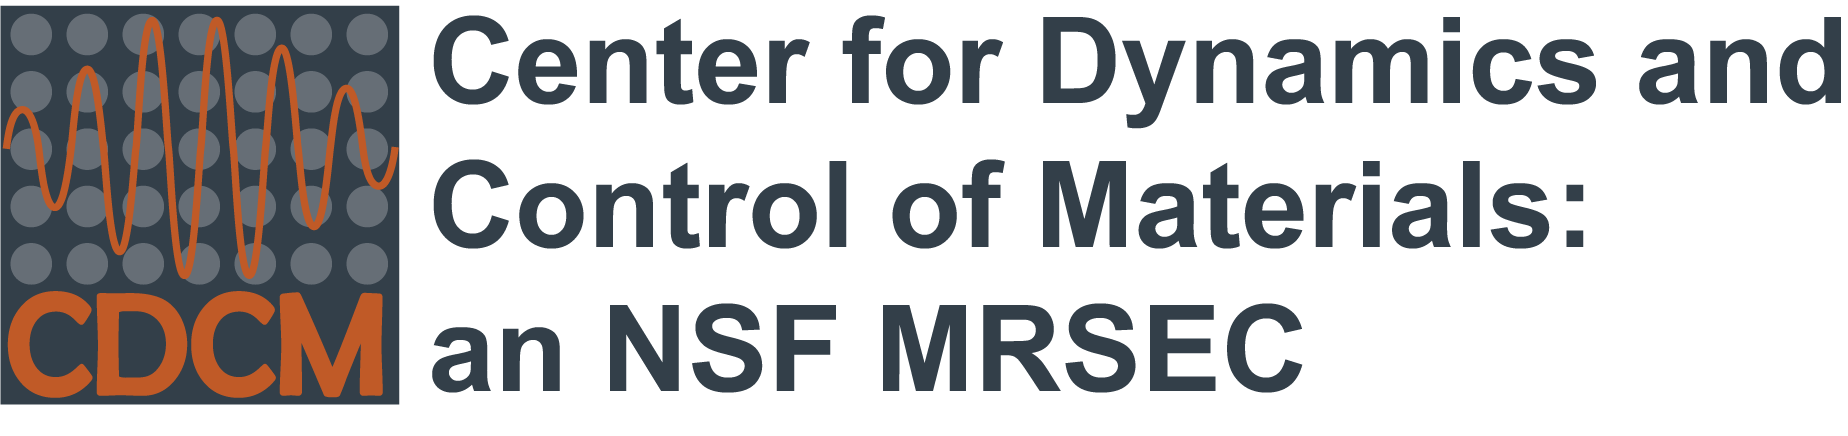 Center for Dynamics and Control of Materials: an NSF MRSEC home